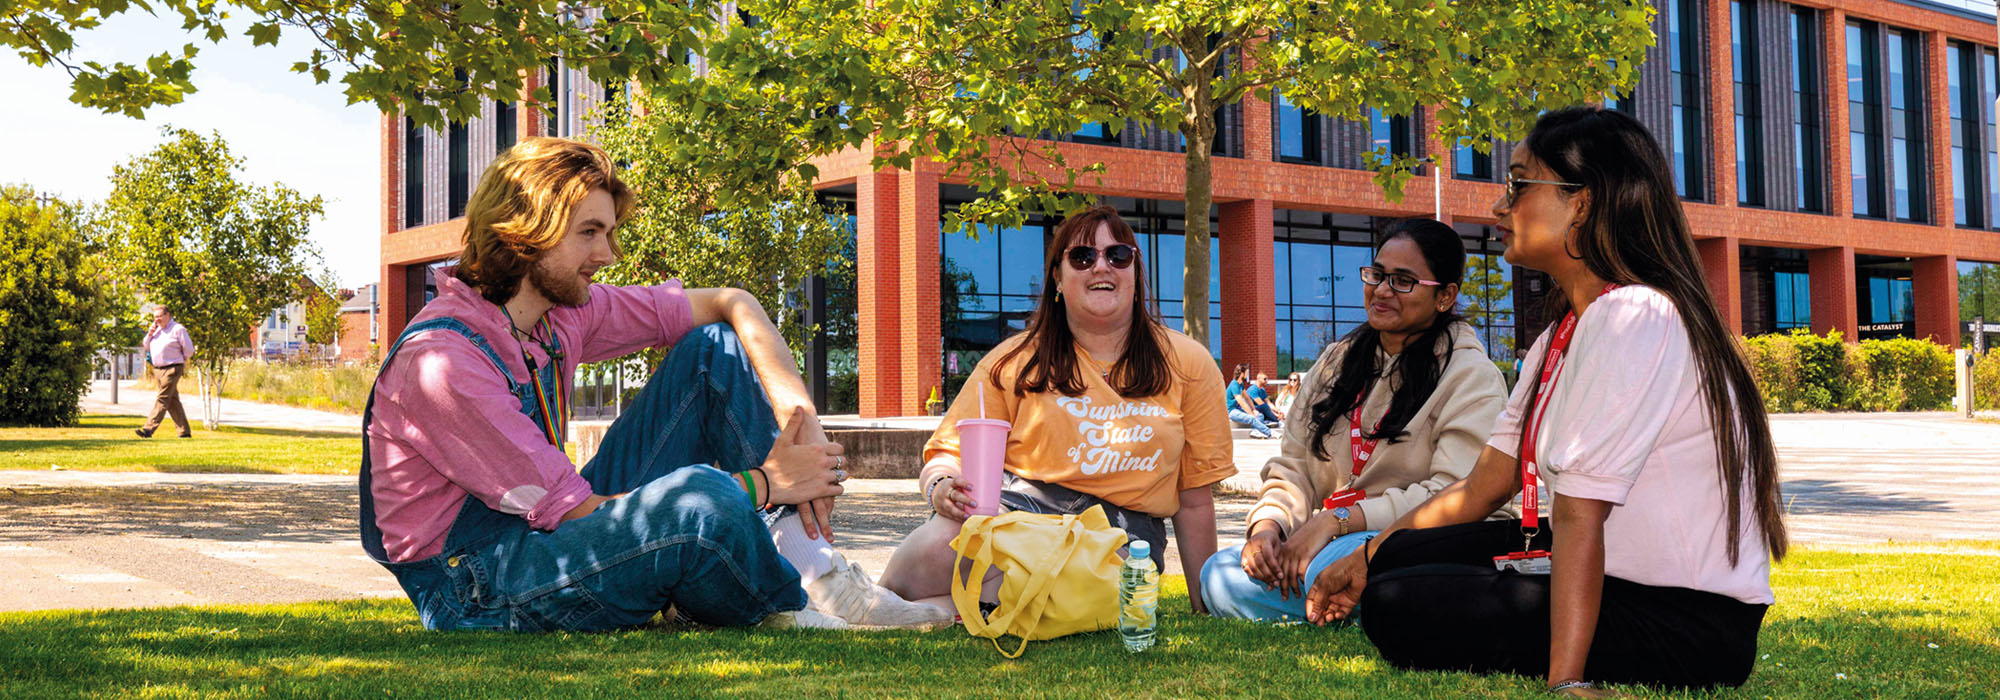 A group of four students wearing casual clothing sitting on a patch of grass talking to each other outside the Catalyst building on a bright day